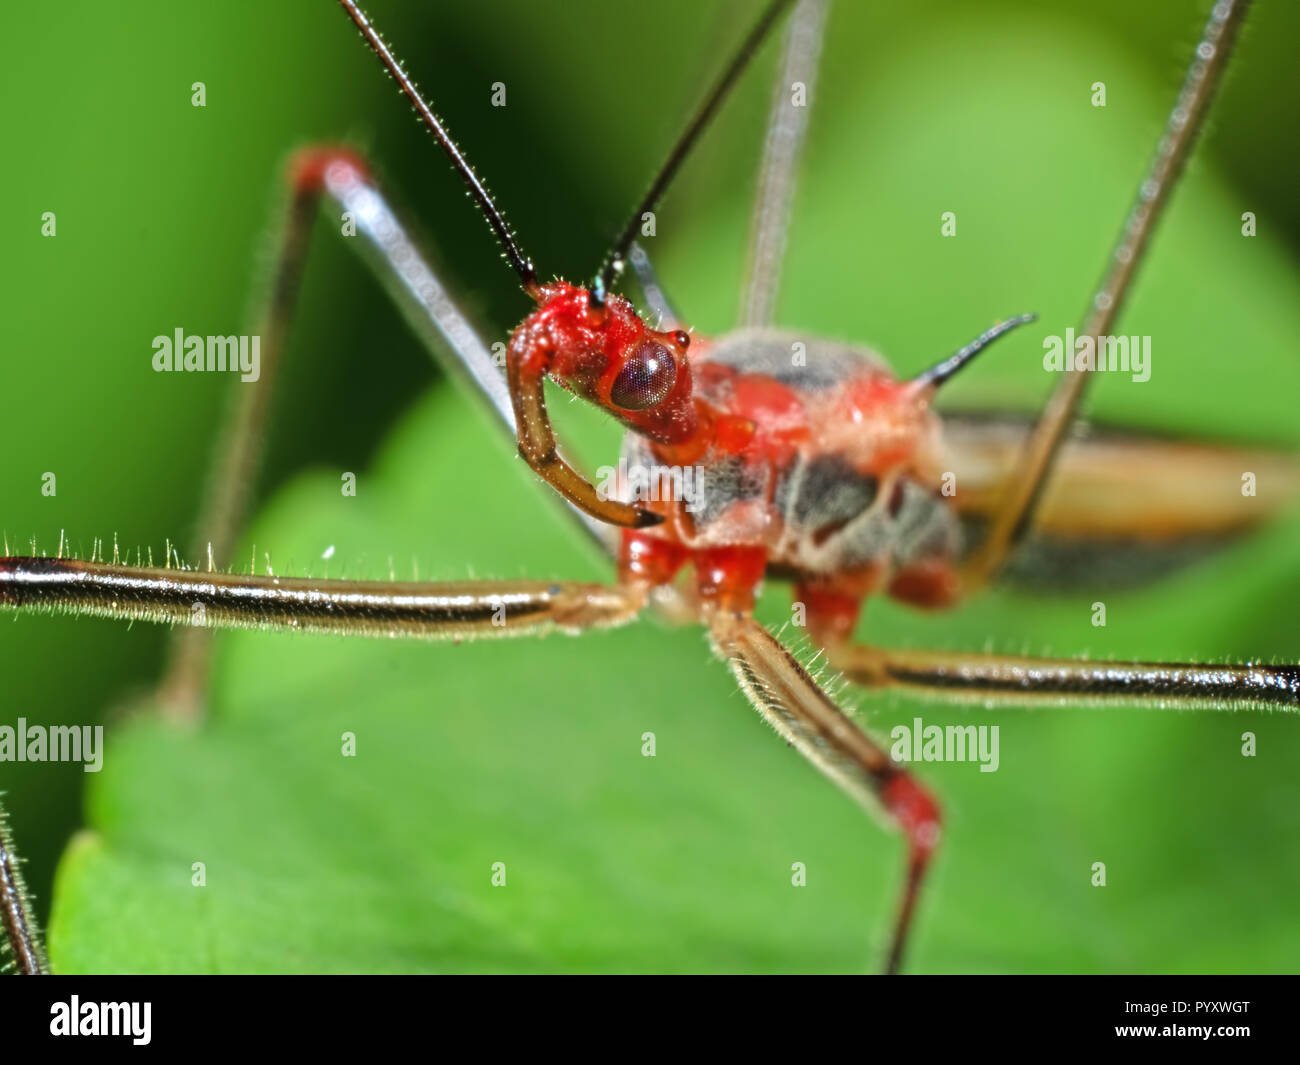 Macro Photography of Head of Assassin Bug on Green Leaf Stock Photo